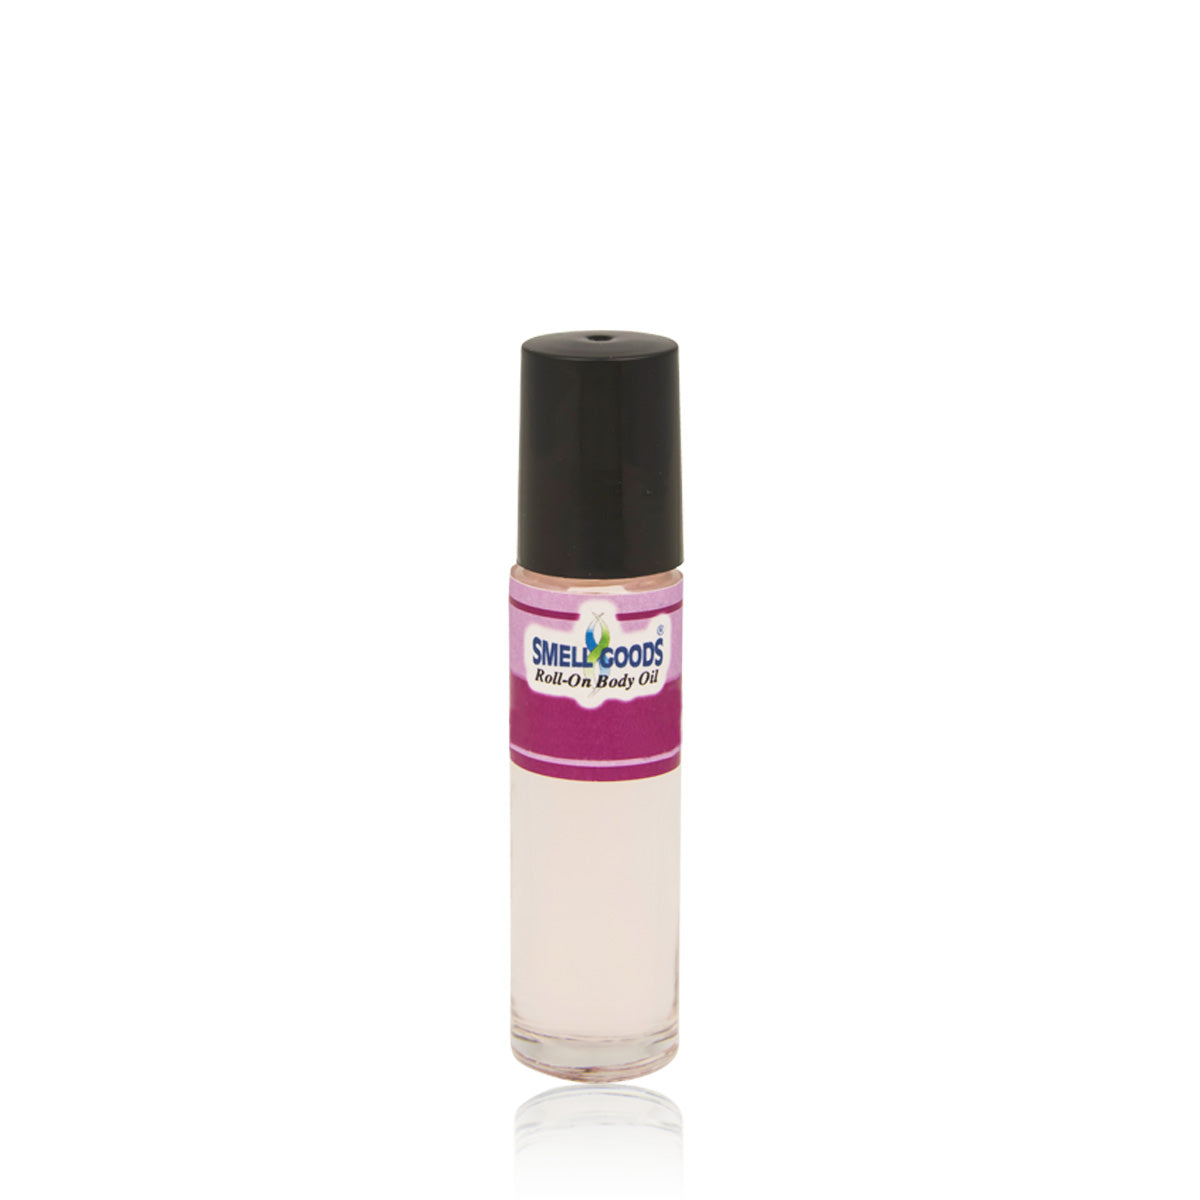 Forever by Mariah Carey Type (Women) Roll-On